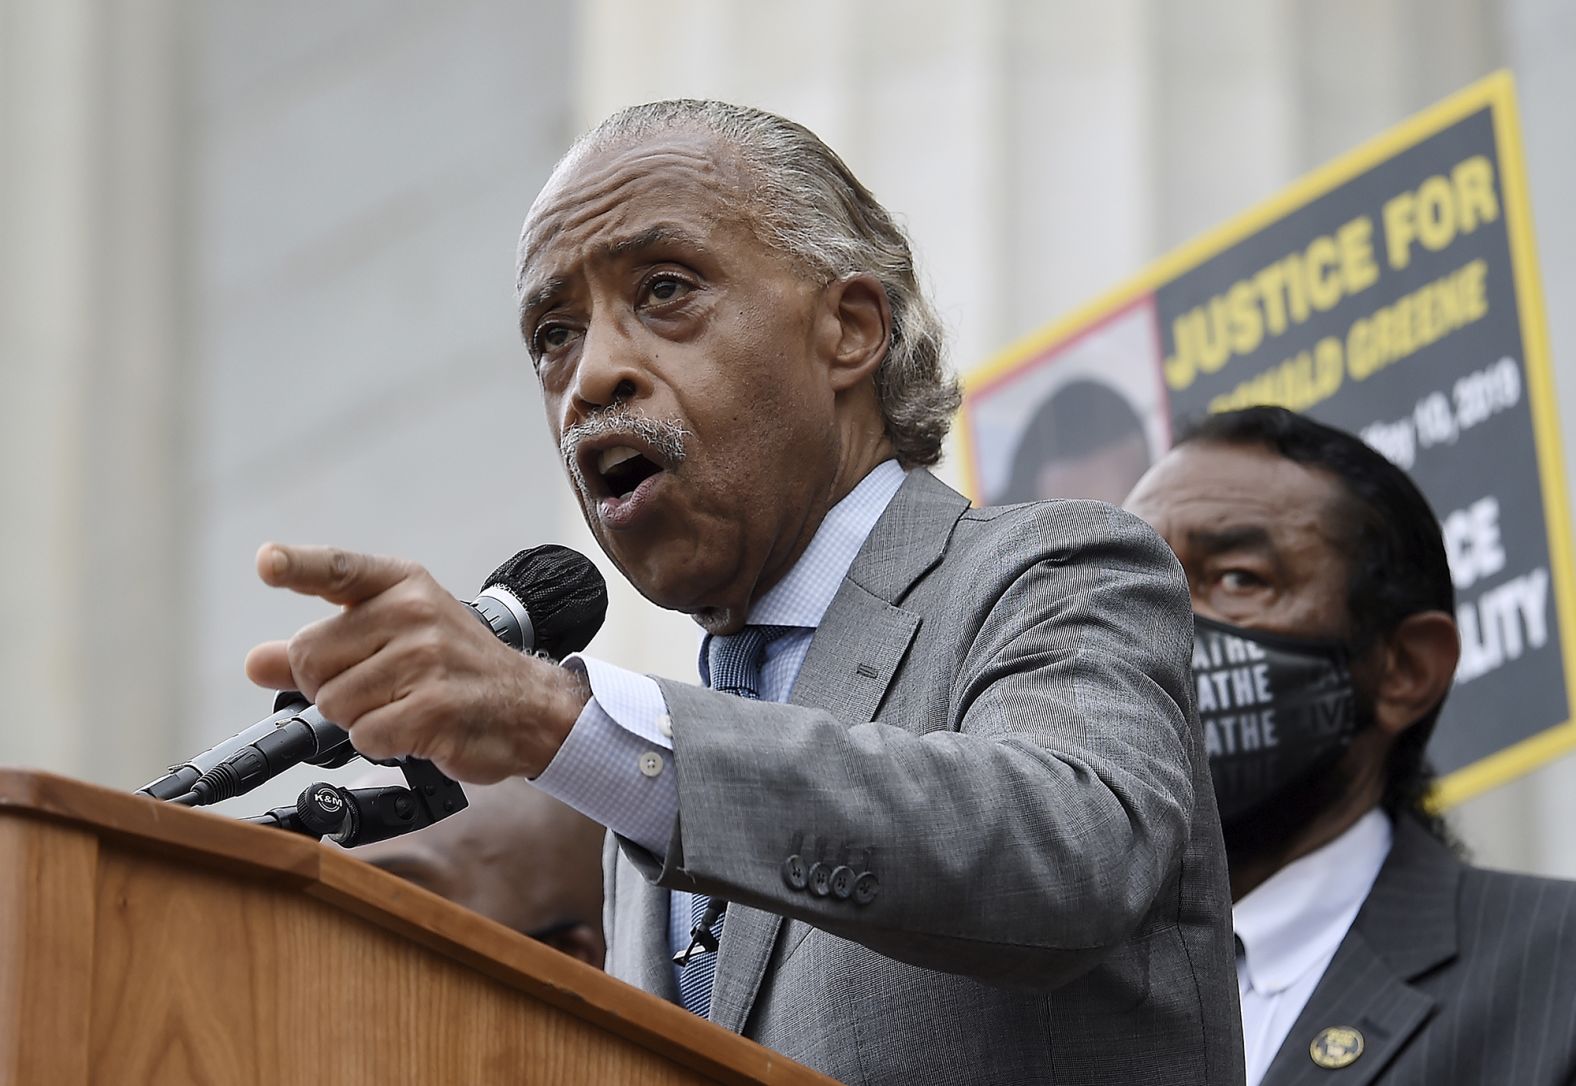 The Rev. Al Sharpton speaks at the Lincoln Memorial on August 28.